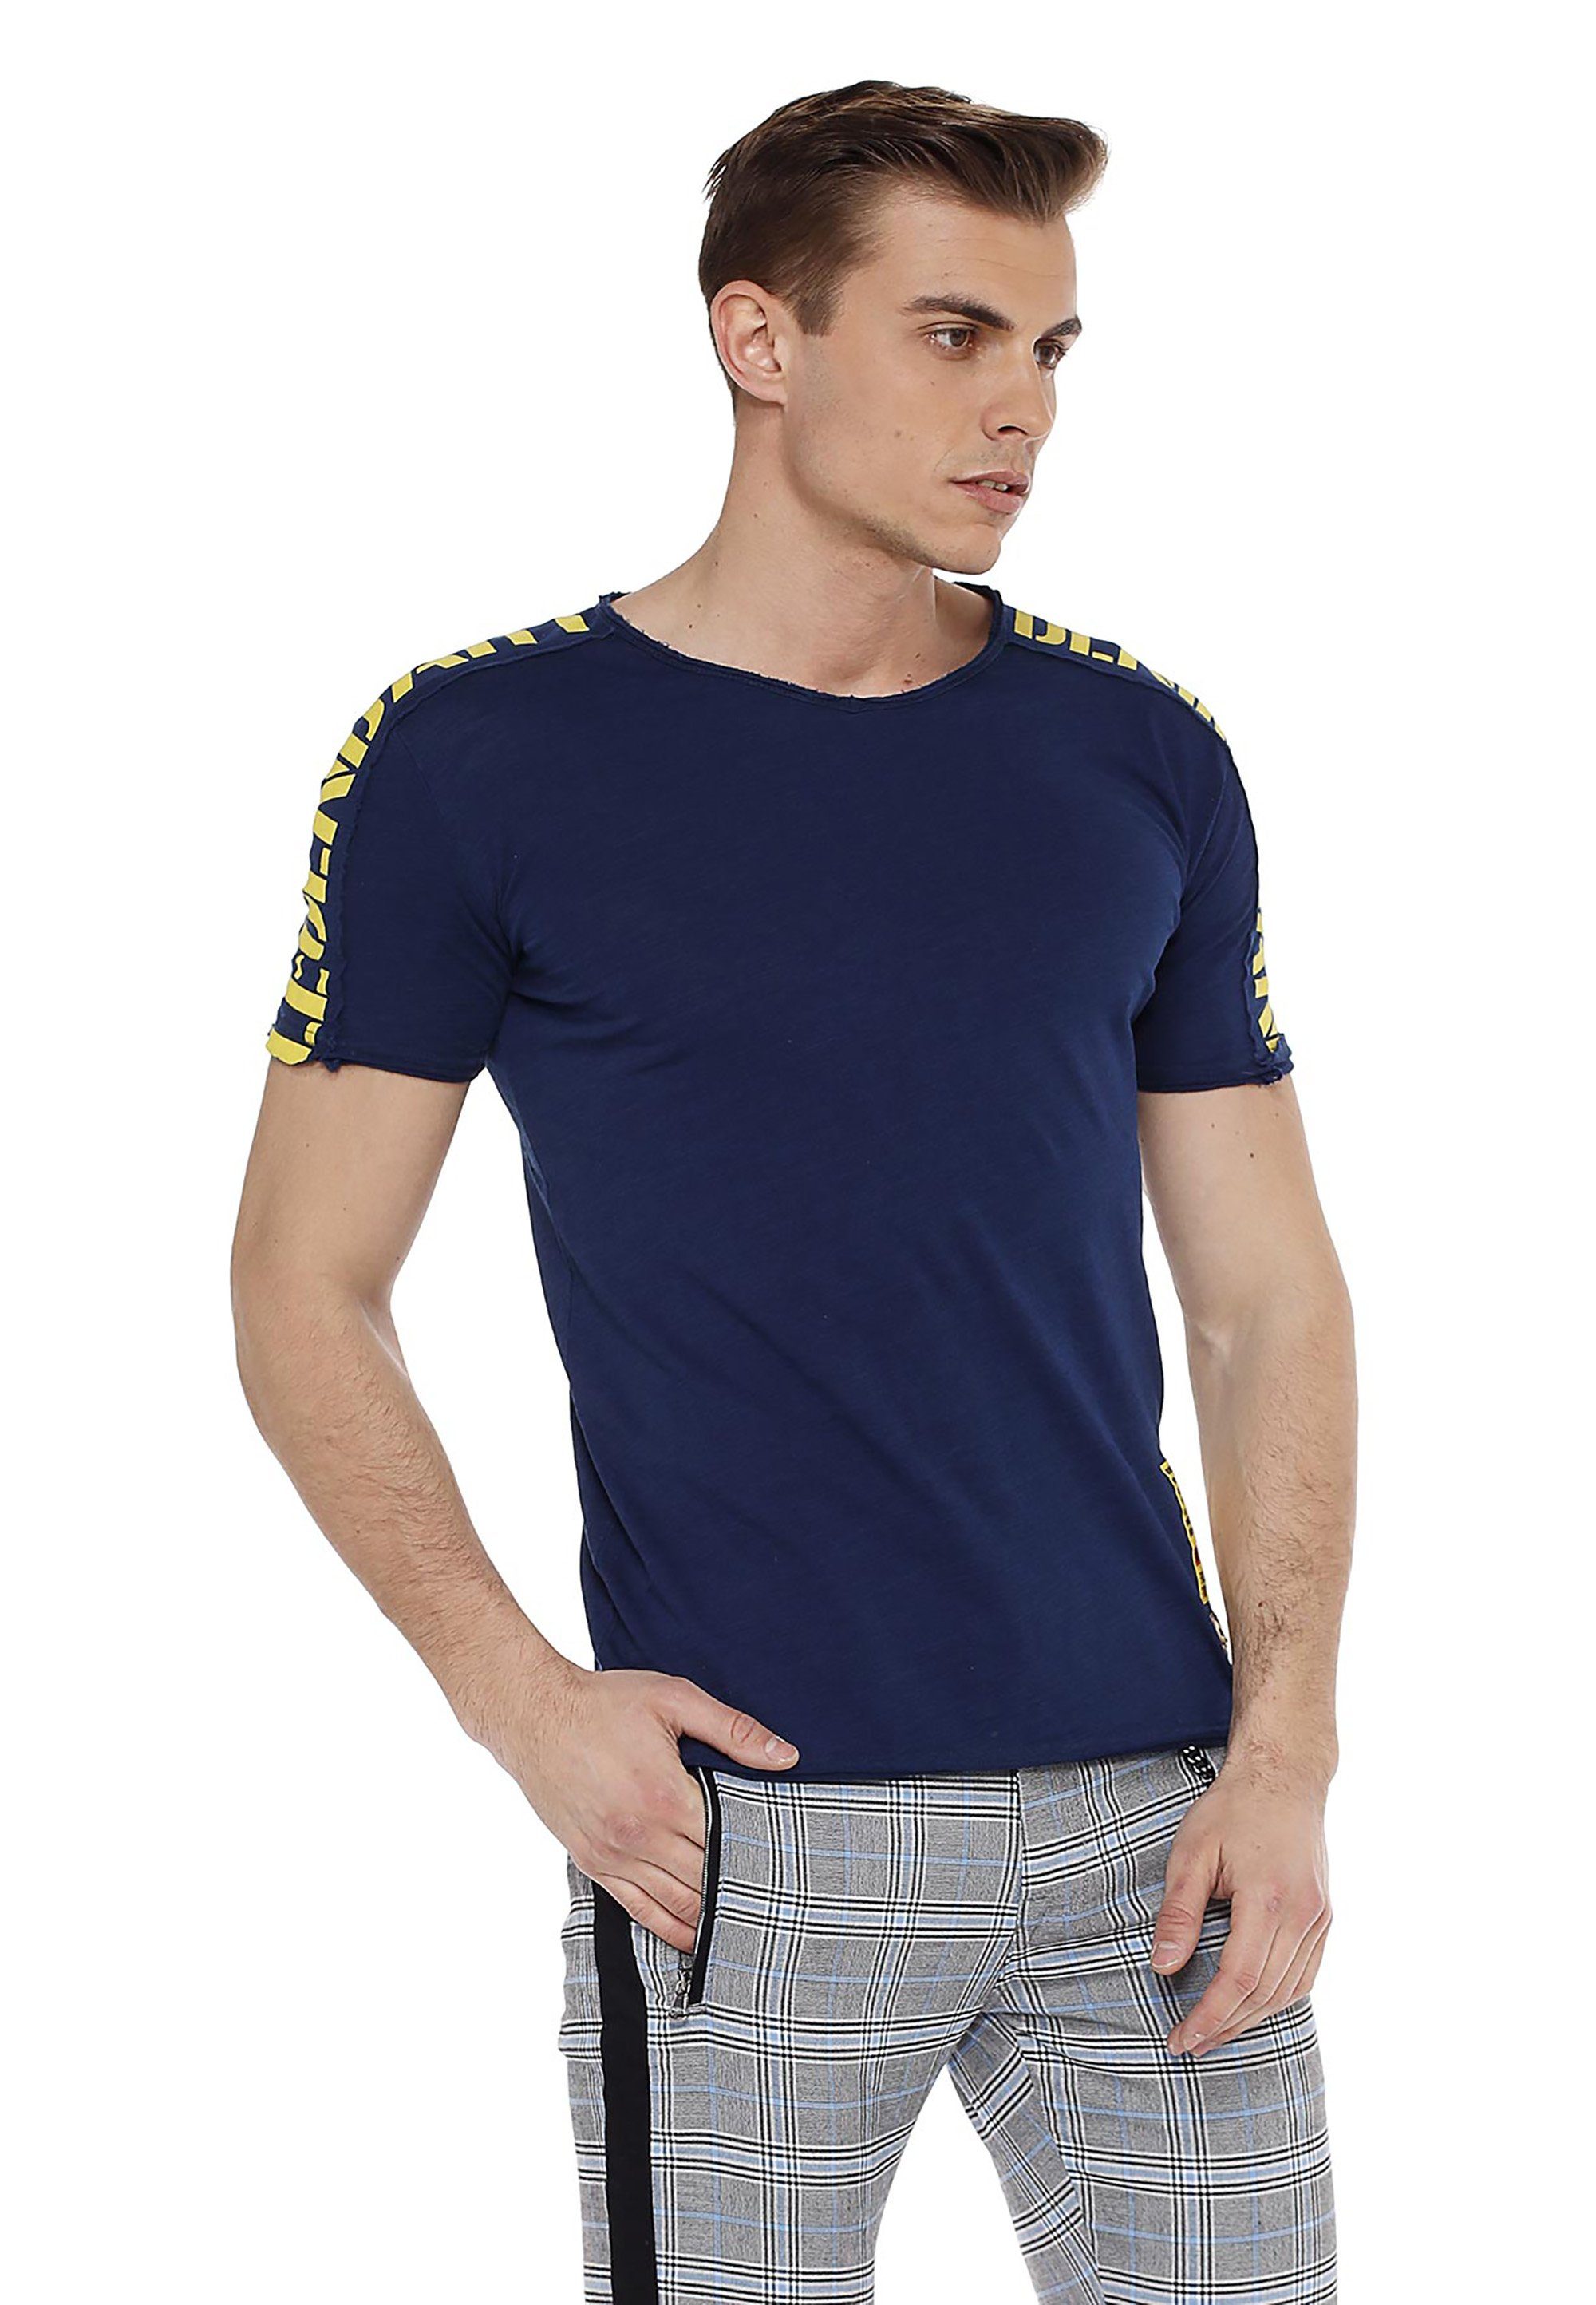 Relaxed-Fit T-Shirt im & Cipo Baxx